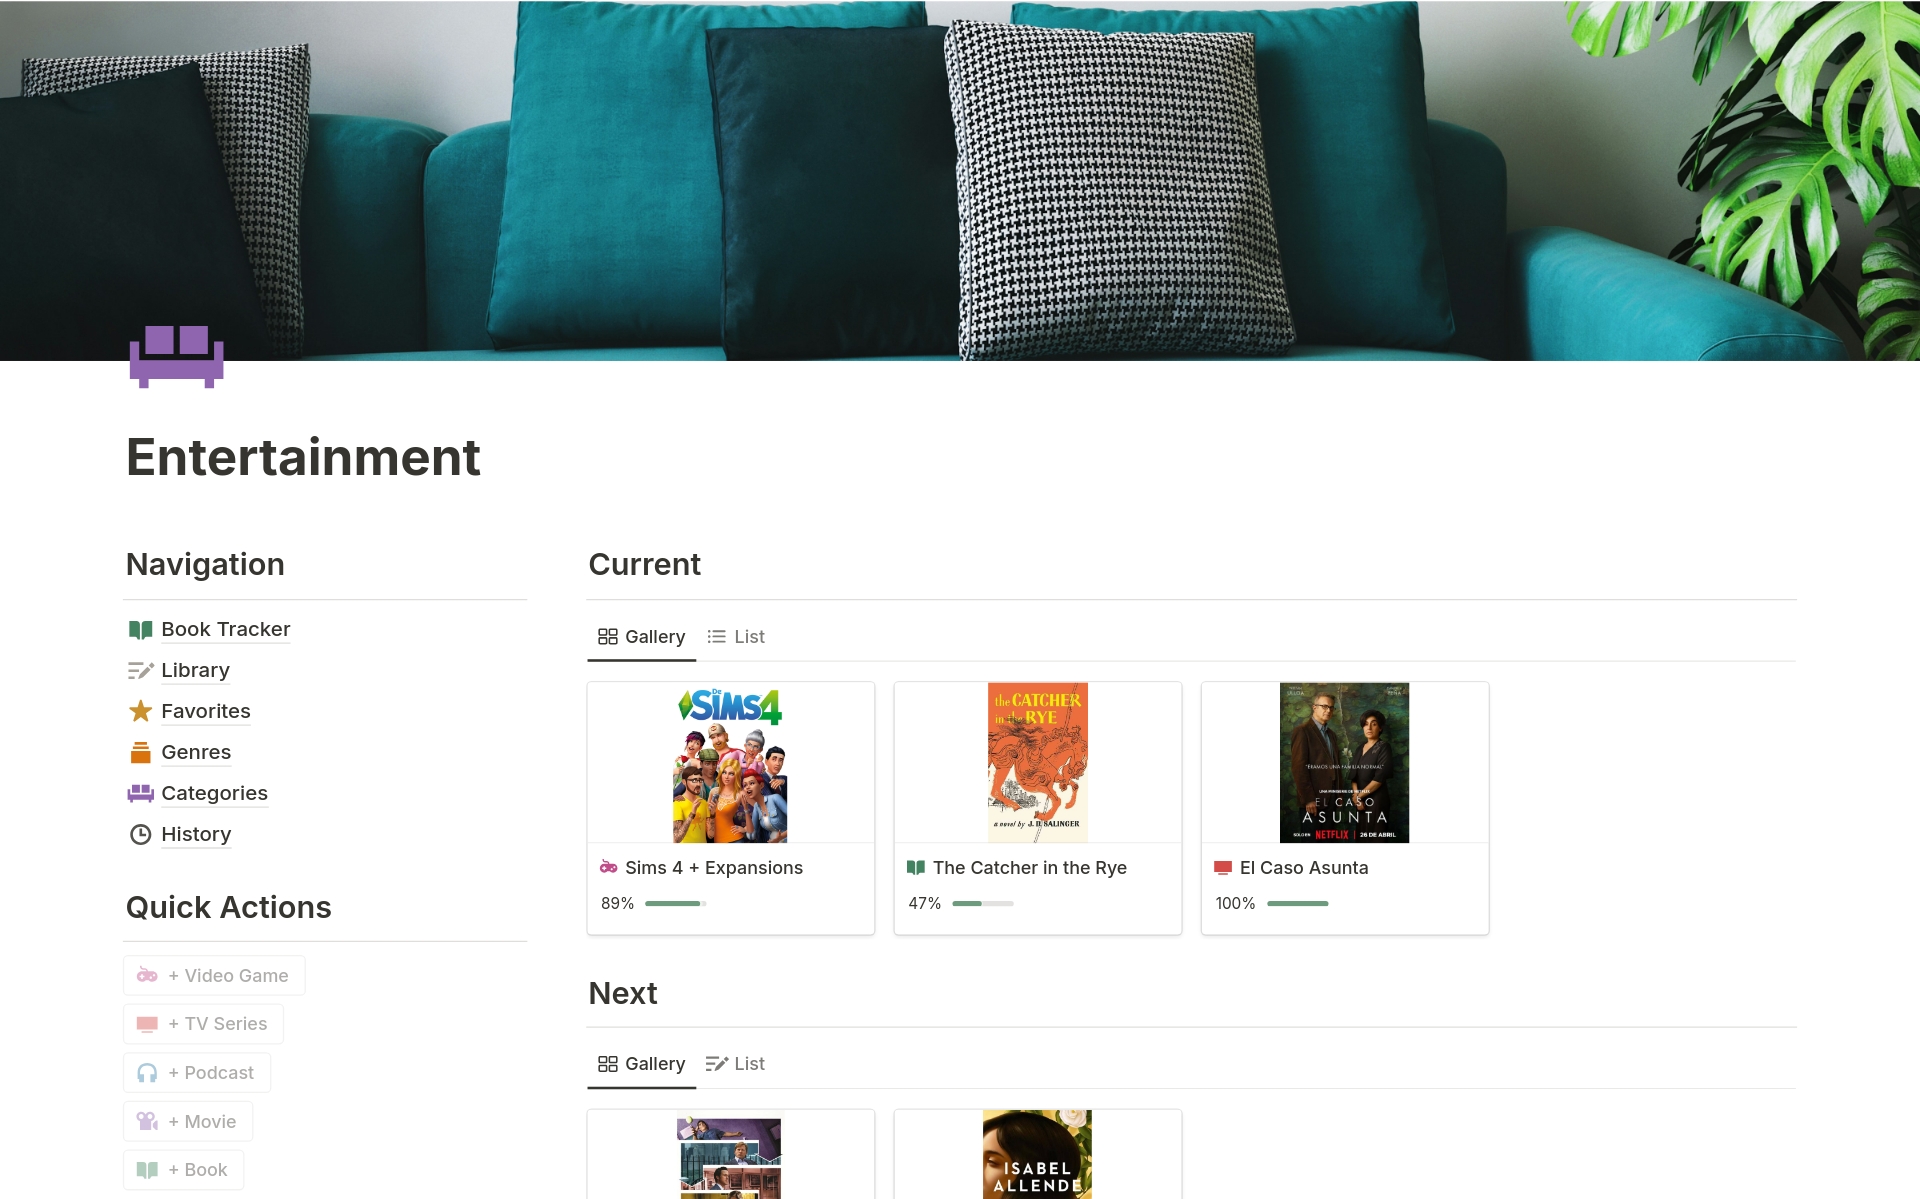 Explore the ultimate Notion template for organizing TV shows, movies, podcasts, books, and games! Rate and categorize by genre, plus a dedicated book tracker. Perfect for entertainment lovers!